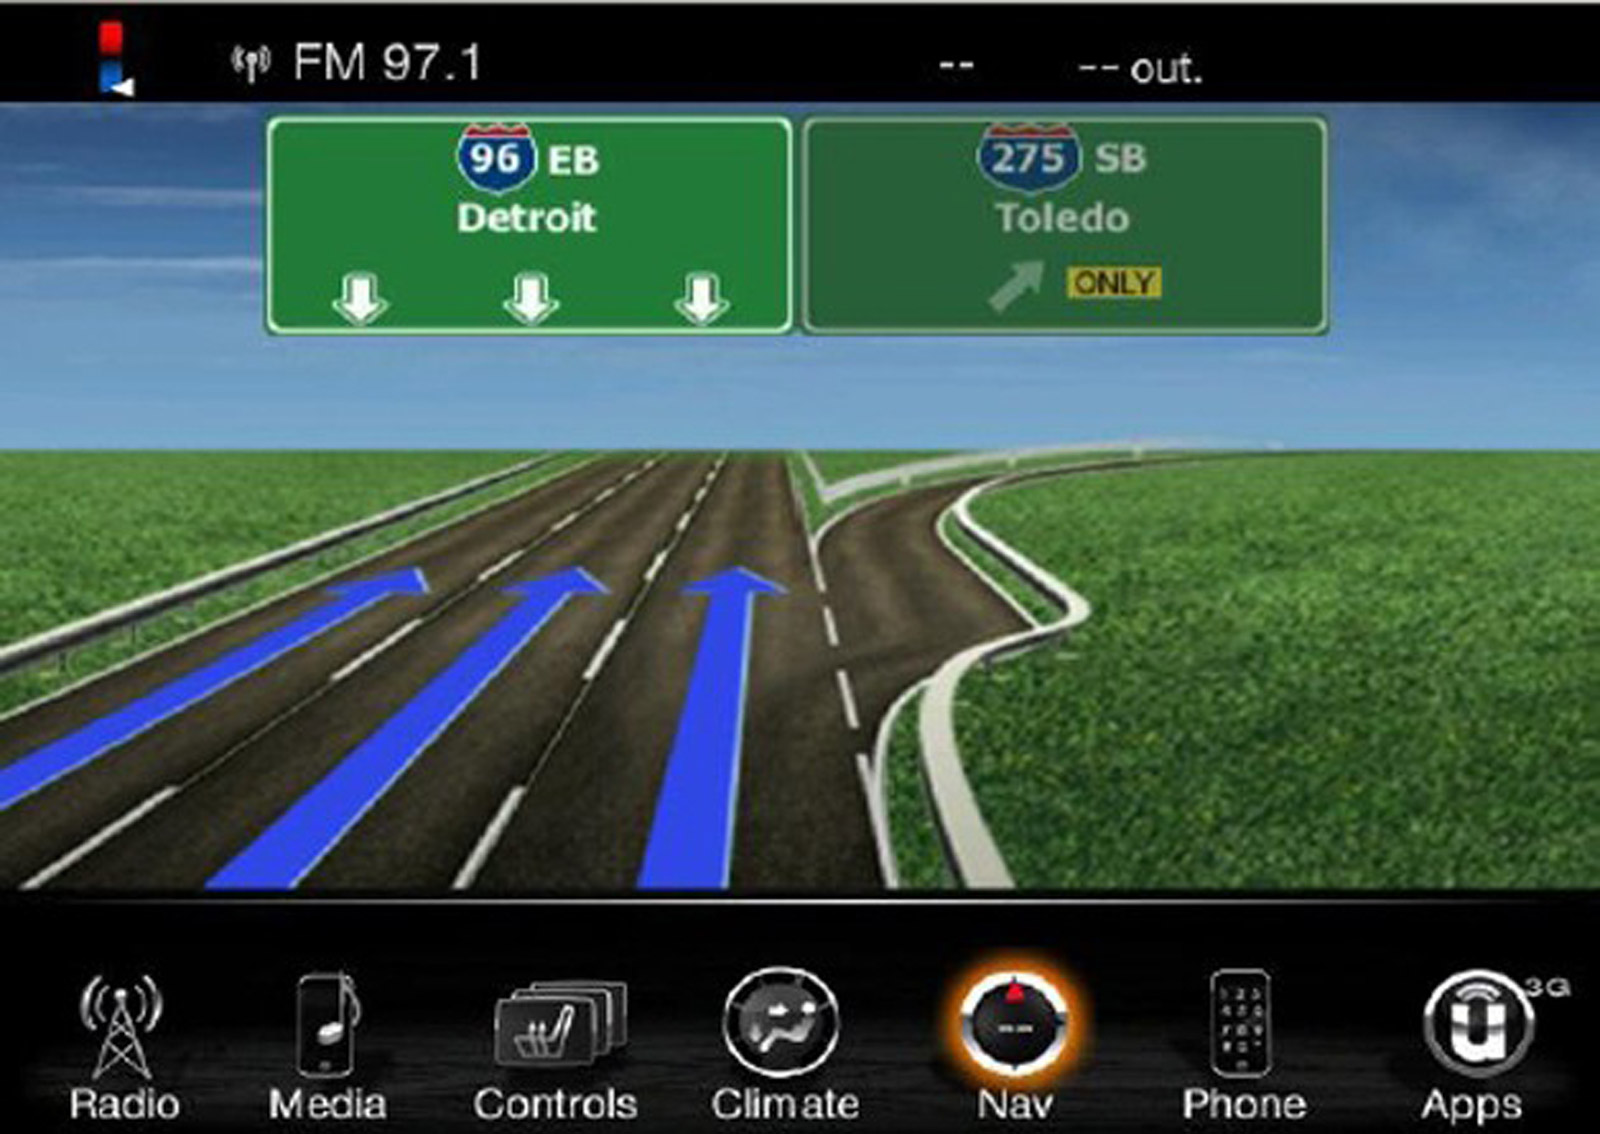 Chrysler Presents Updated Uconnect System At 2013 CES